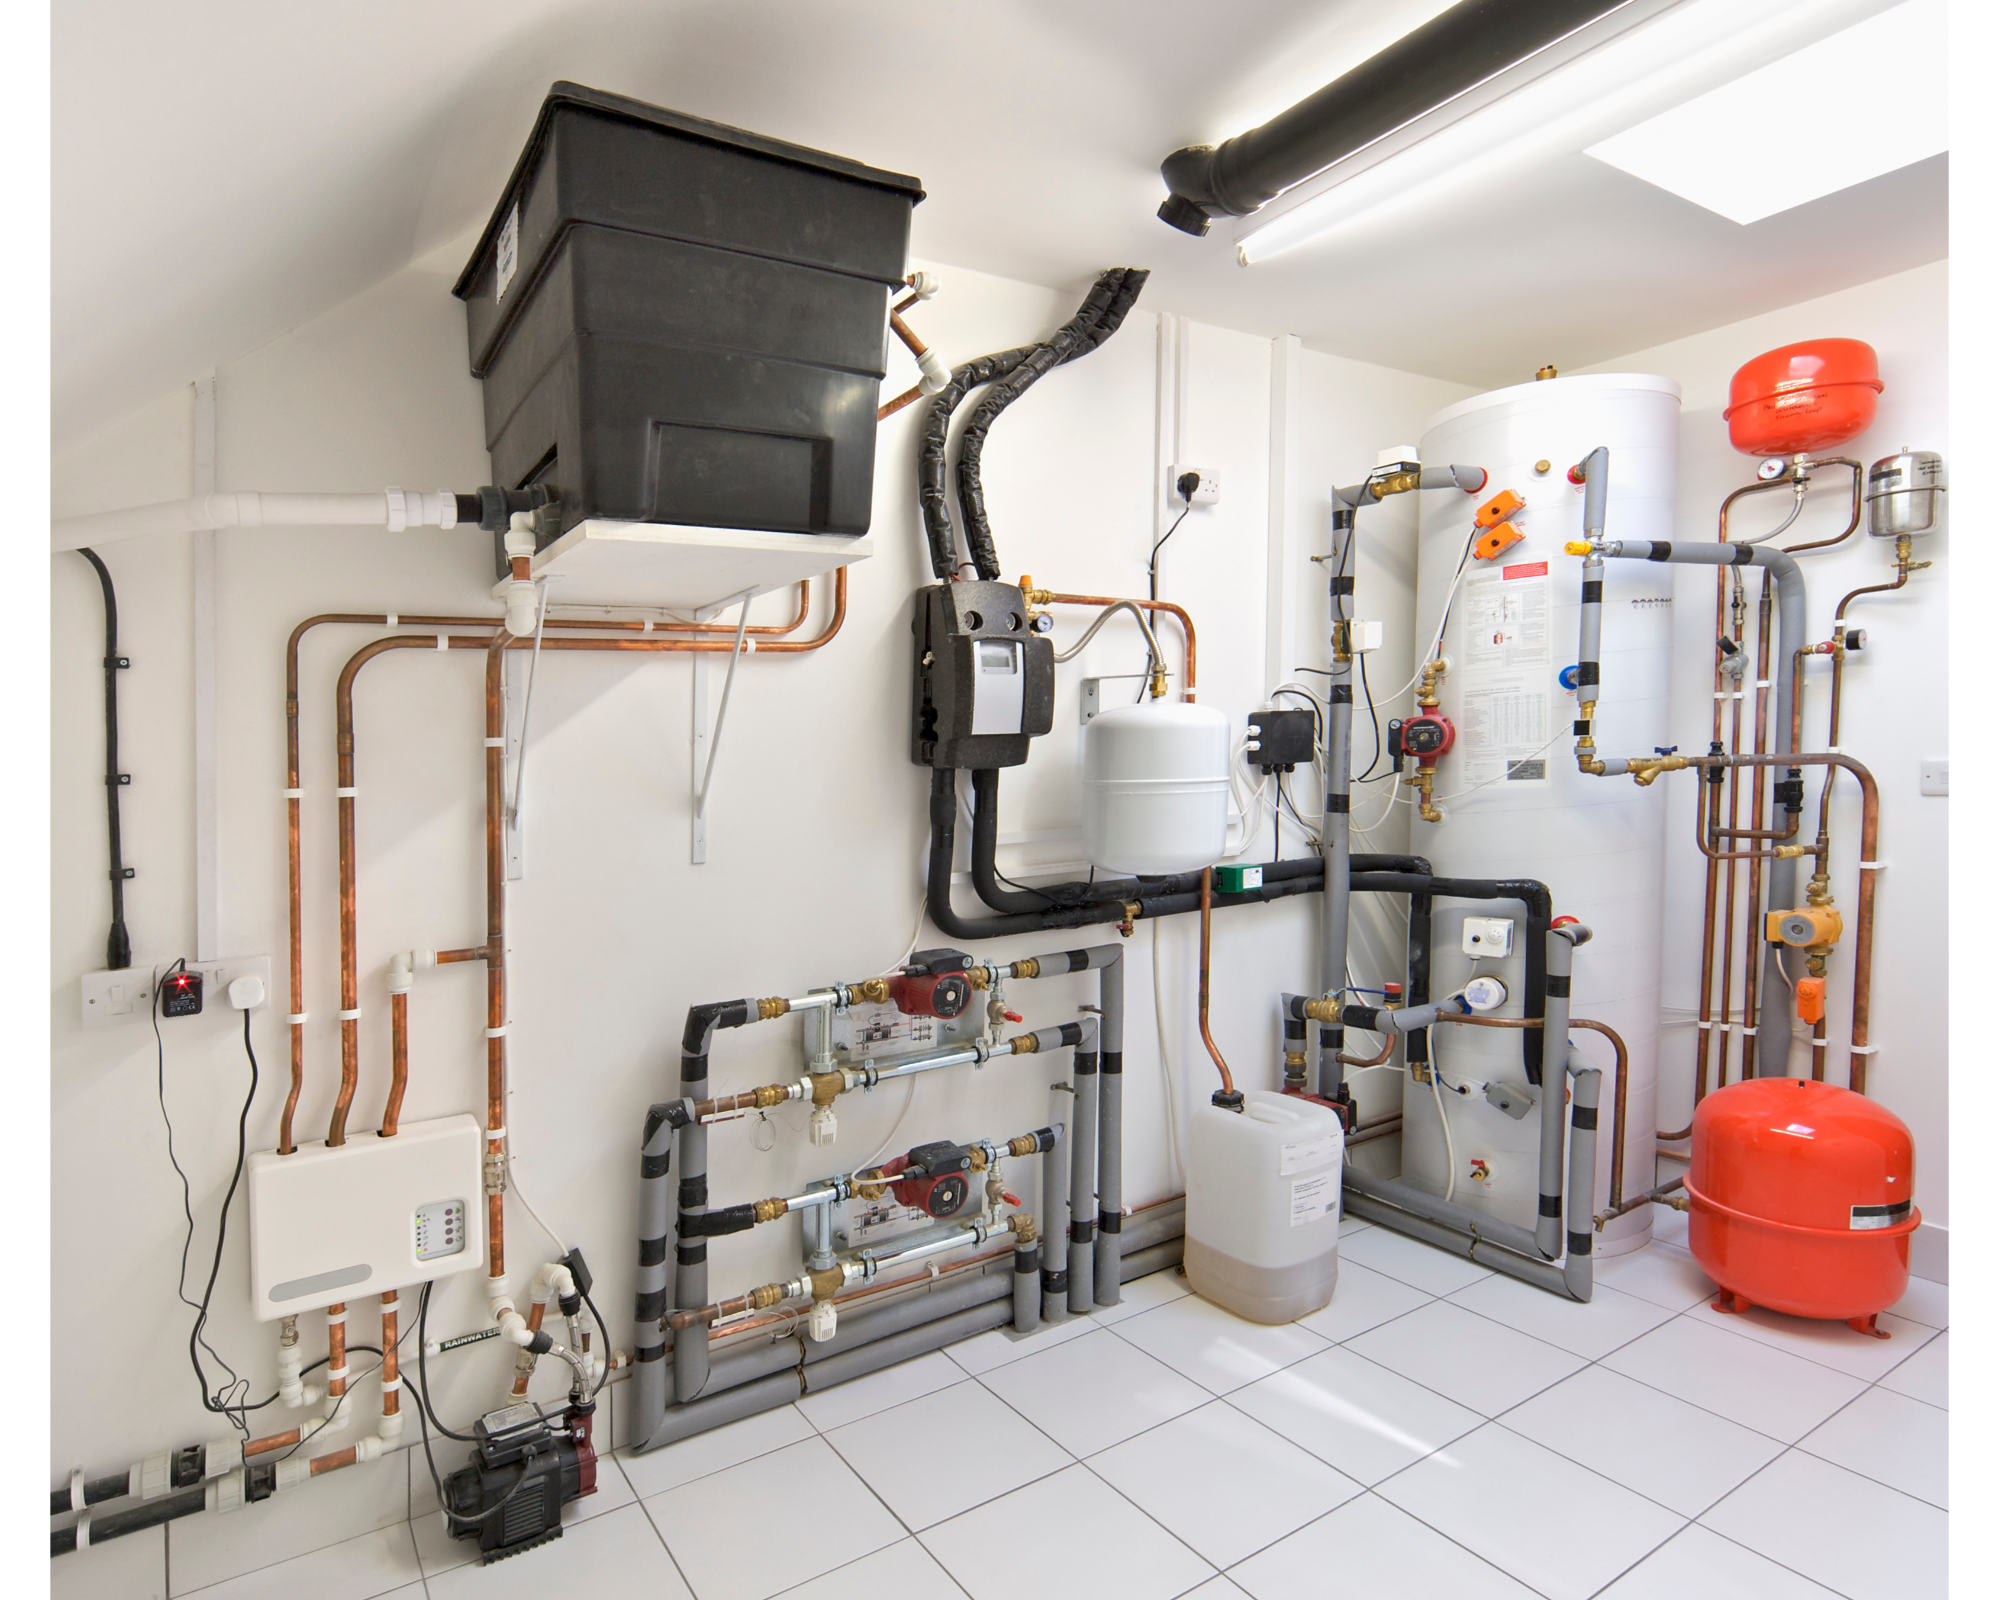 We here at Frontier install and maintain any water heater system.